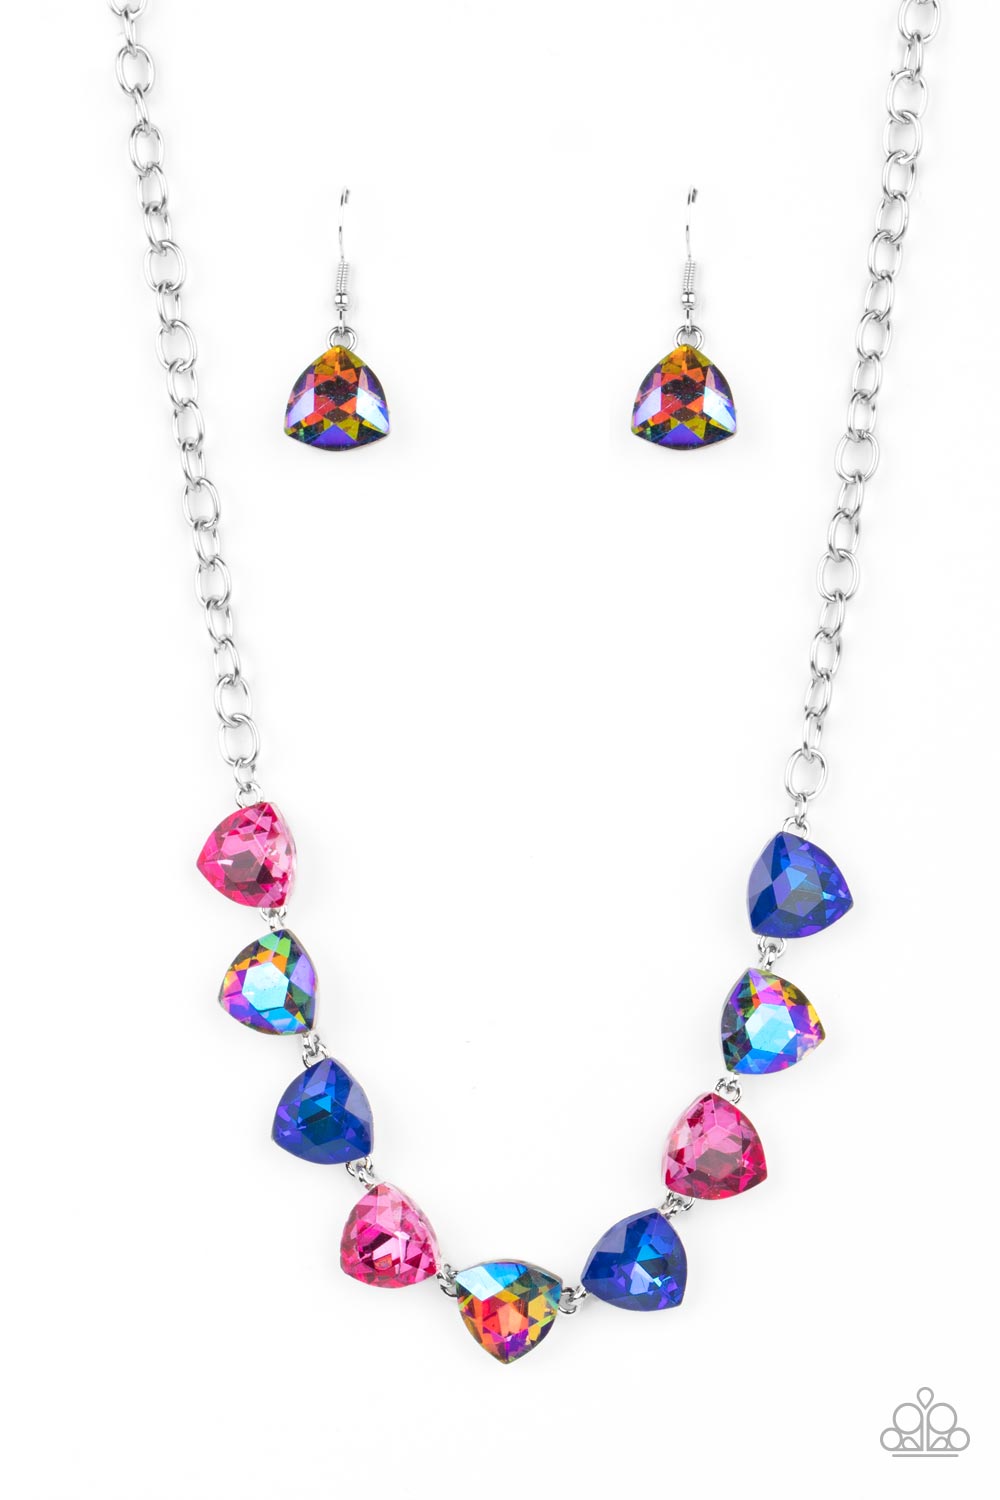 Paparazzi Accessories Dreamy Drama - Blue A collection of dreamy trilliant-cut rhinestones in iridescent shades of blue and pink fall in line along the collar in a majestic finish. Features an adjustable clasp closure. Due to its prismatic palette, color